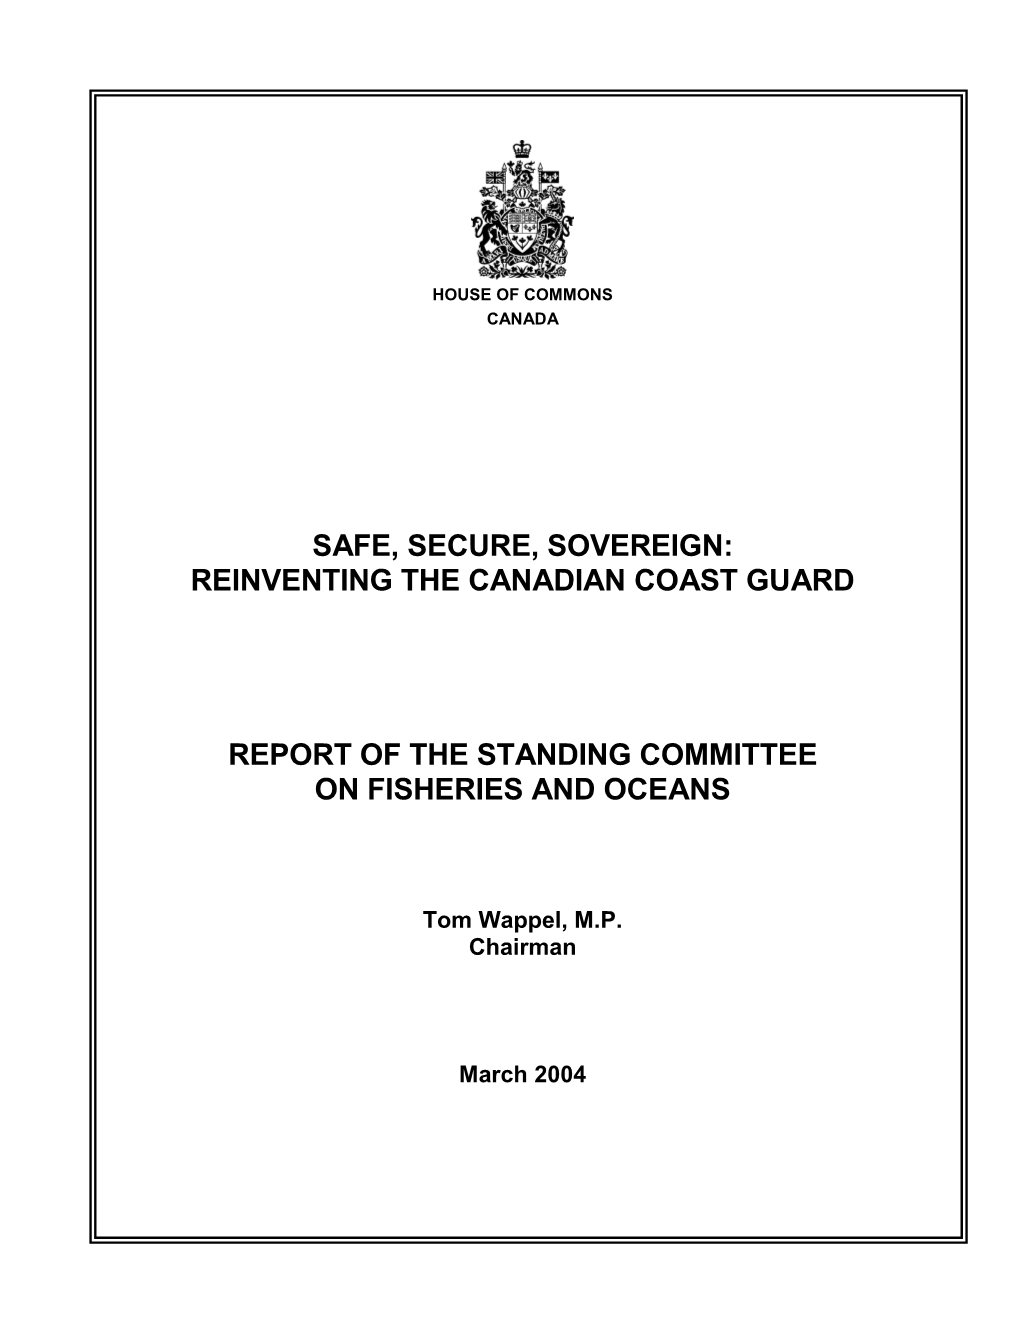 Safe, Secure, Sovereign: Reinventing the Canadian Coast Guard Report of the Standing Committee on Fisheries and Oceans